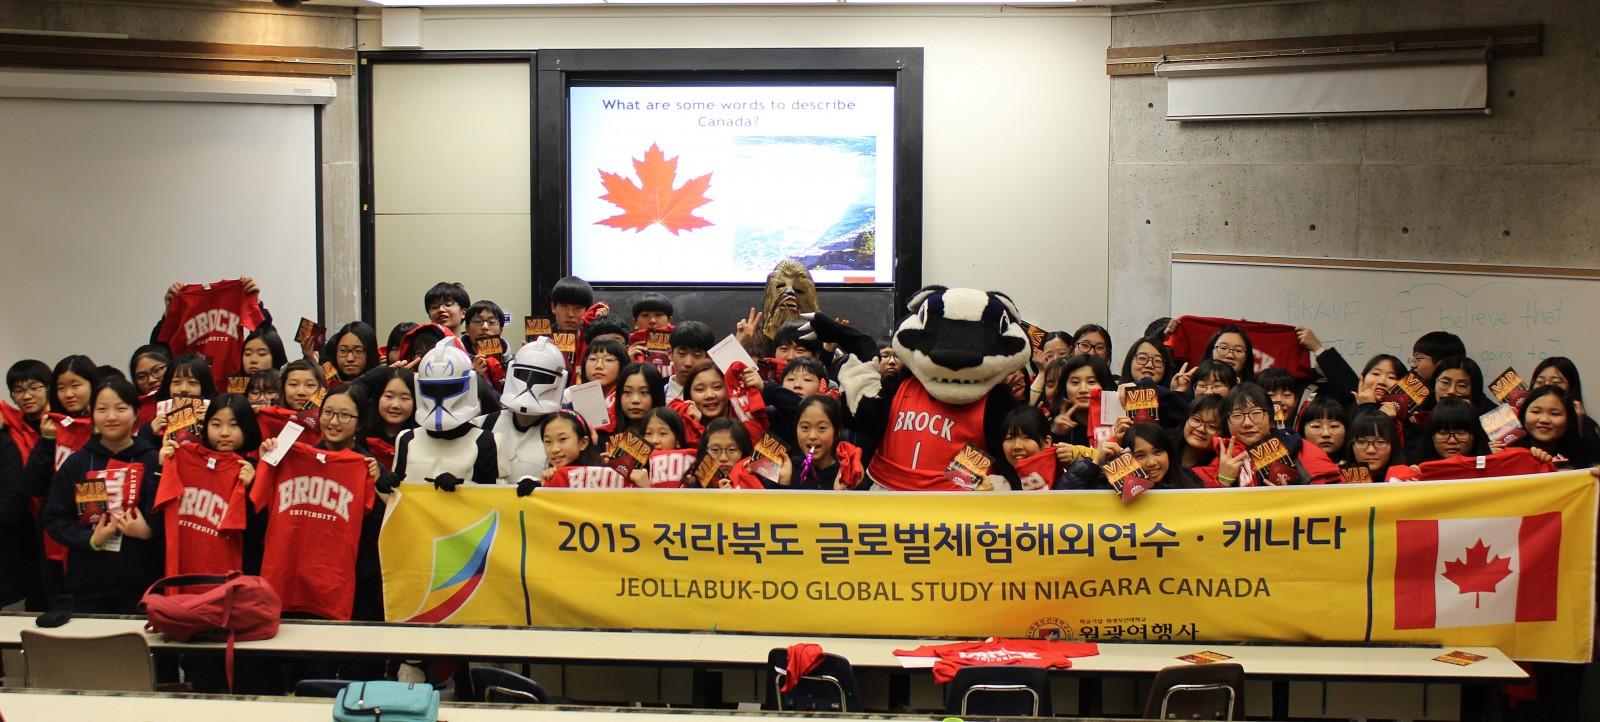 A group of children from South Korea visited Brock University recently for a day of tours, learning and fun.